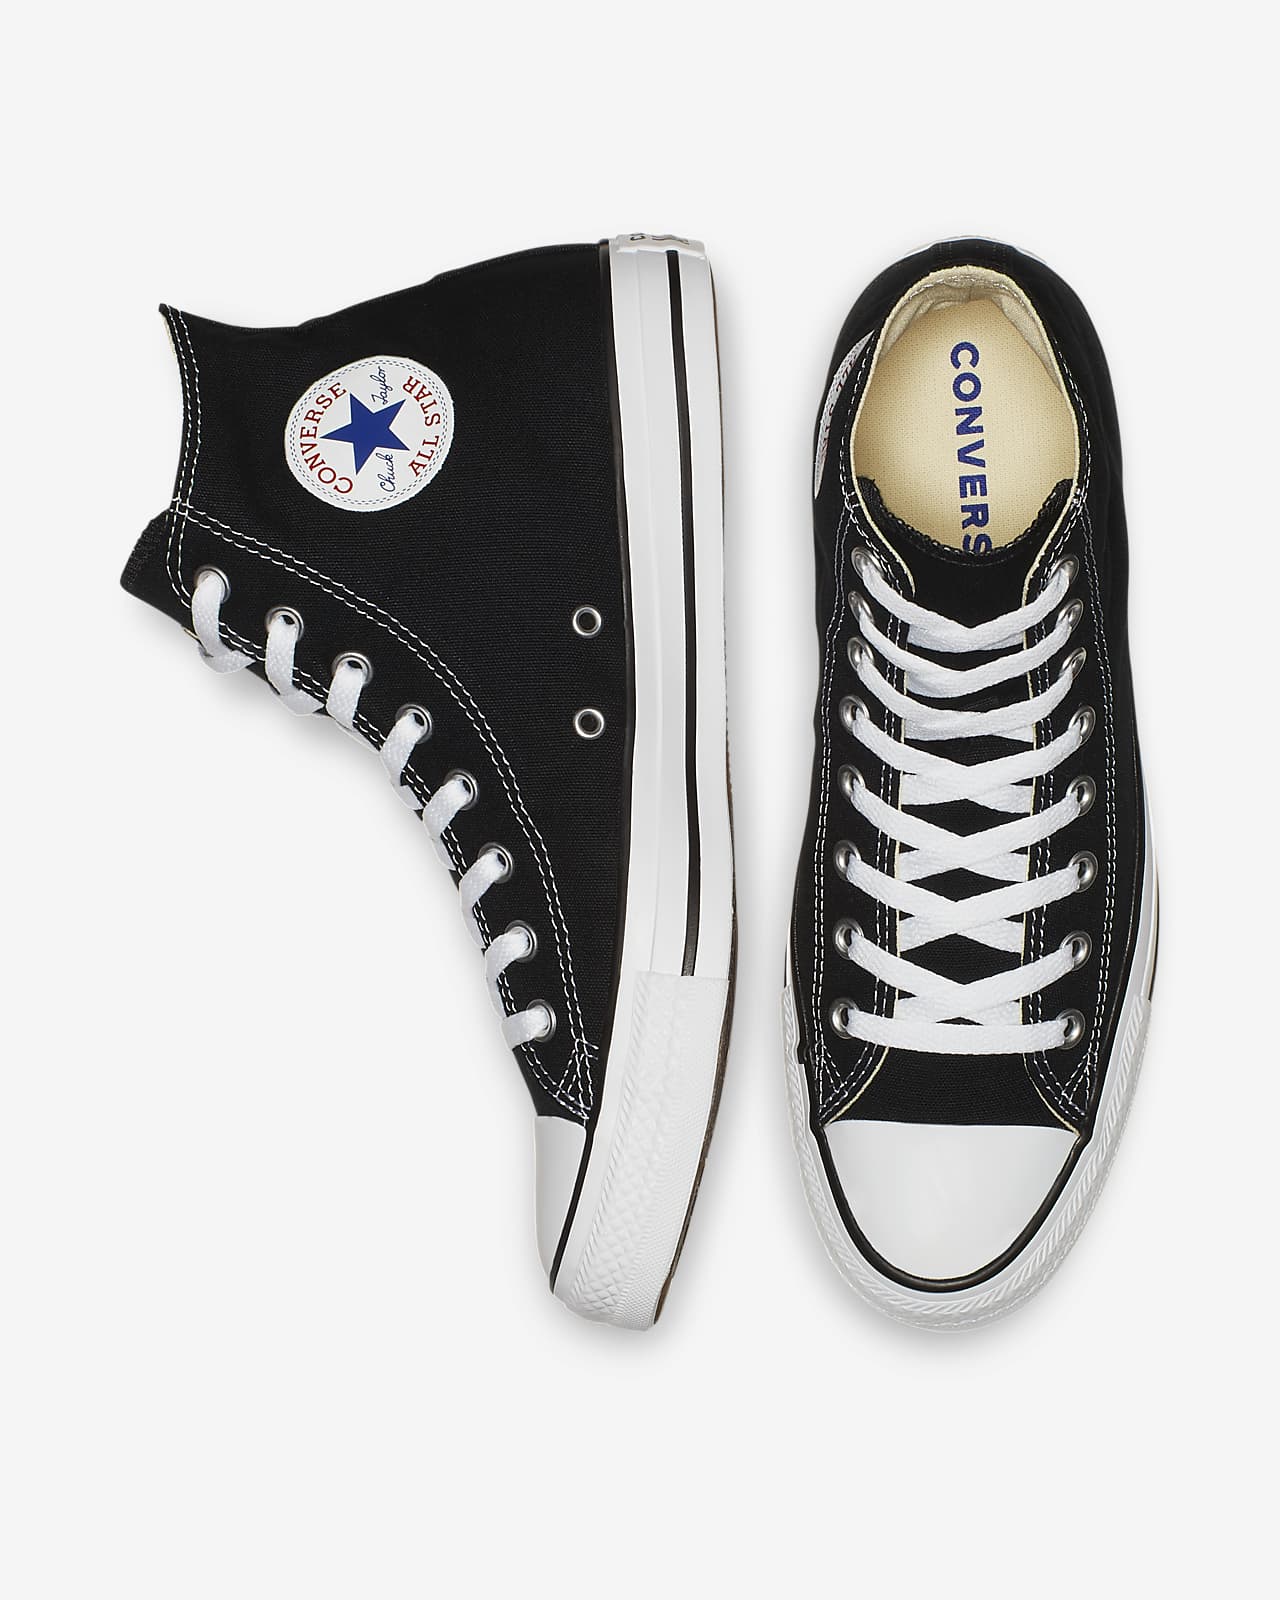 Converse Chuck Taylor All Star High Top Shoes كوكيز برونتو